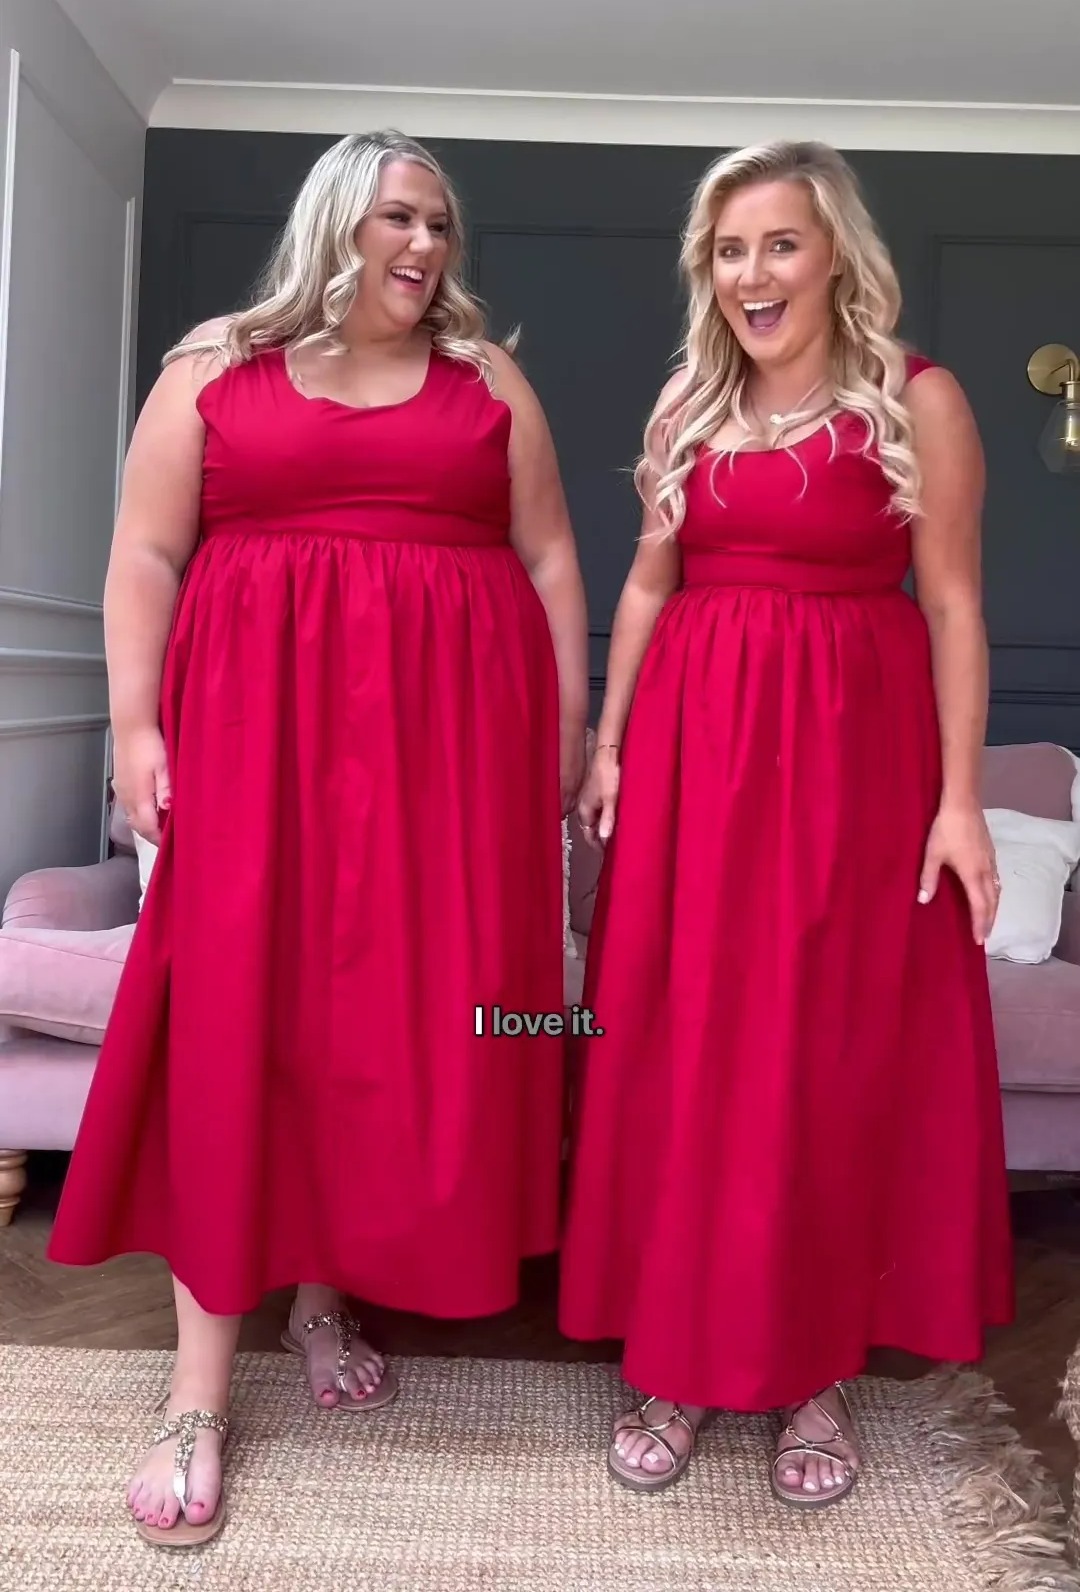 Laura Adlington and her best friend, Lottie Drynan, both tried on two stunning dresses from Next